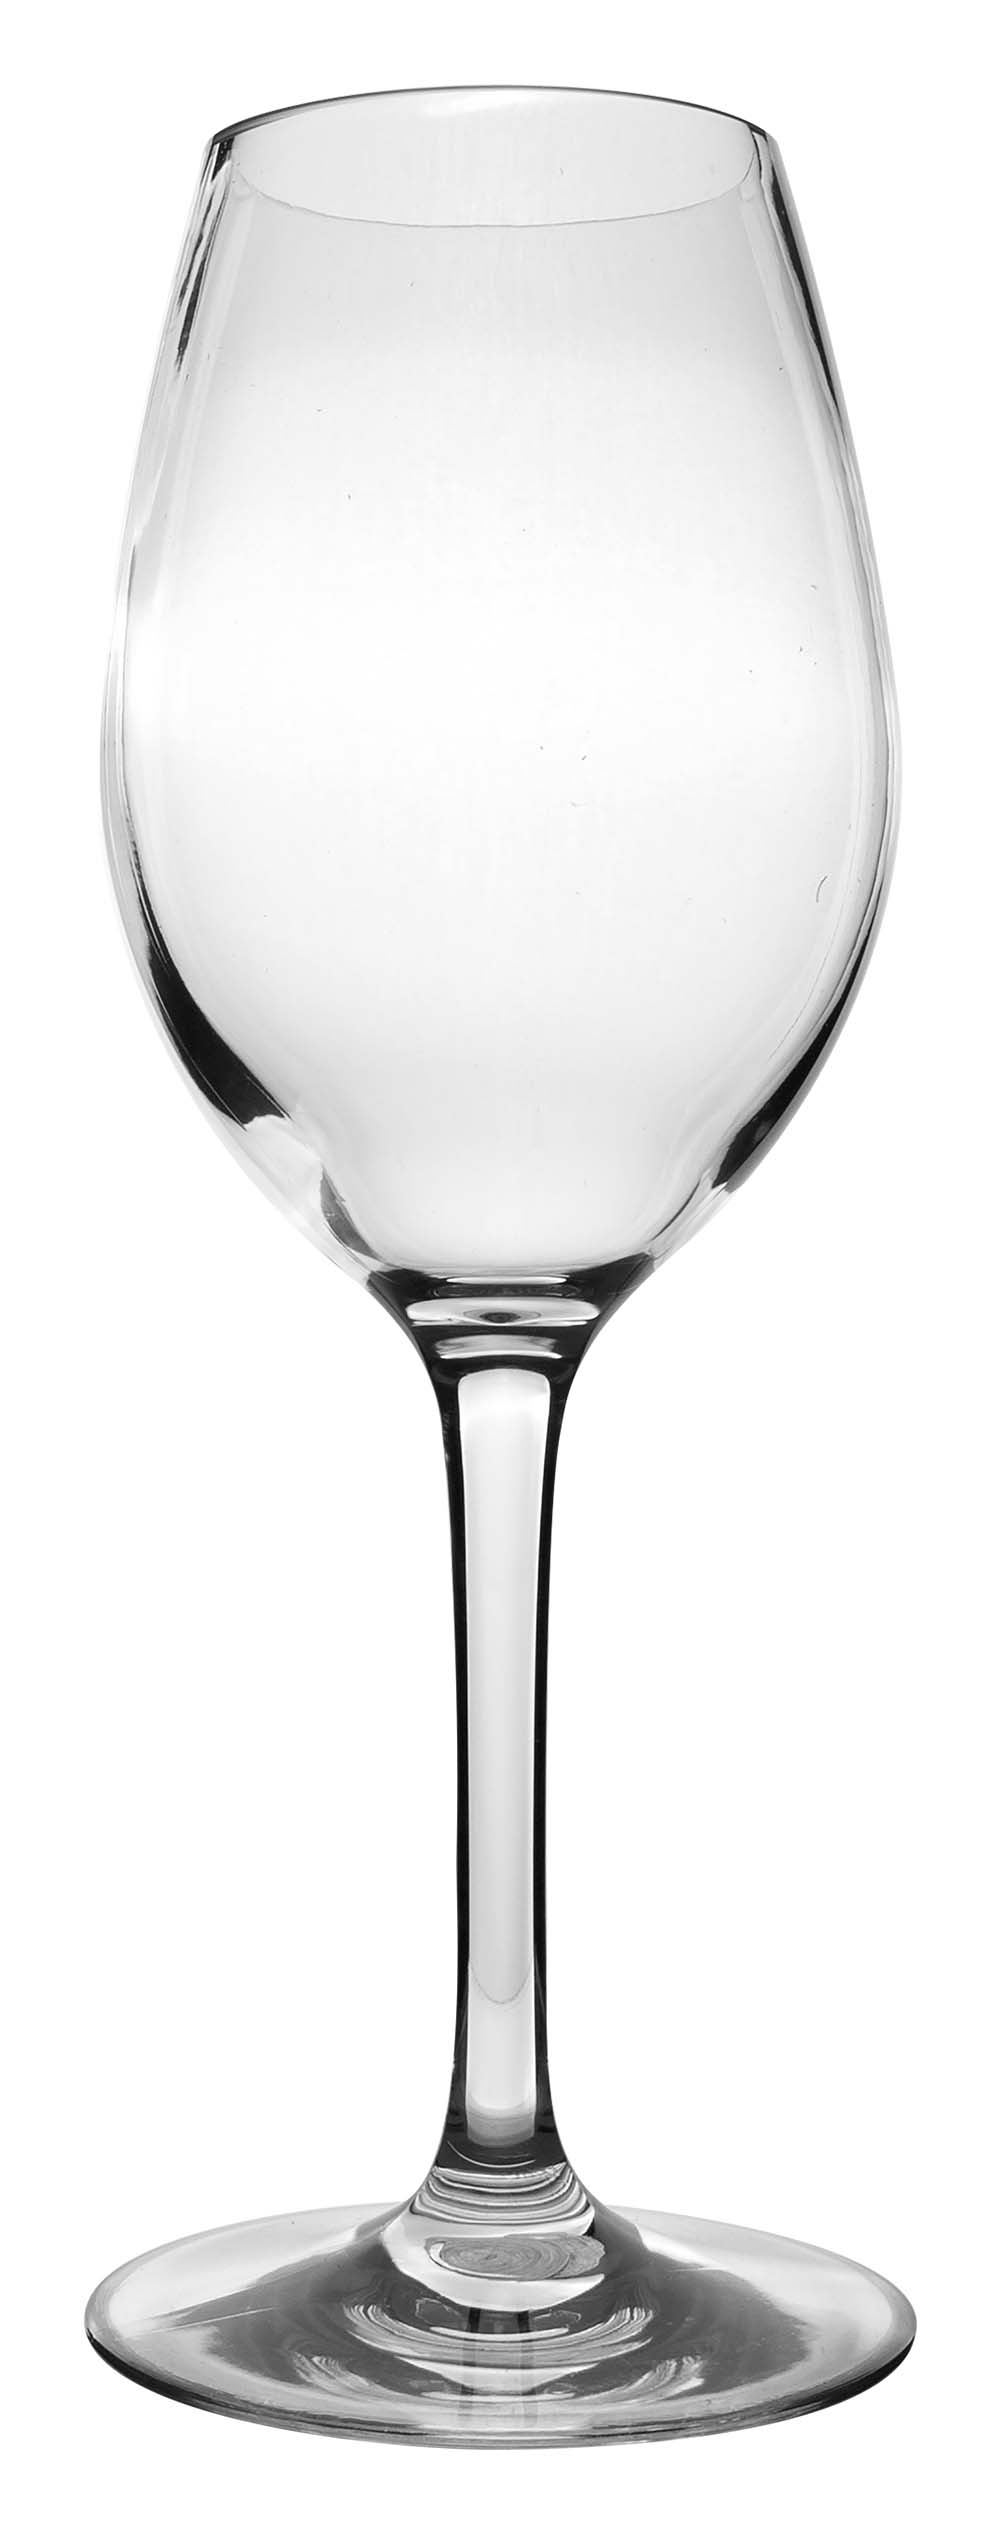 6101462 An extra sturdy and elegant set of white wine glasses. Stand extra stable through the anti-slip silicone ring in the foot. Made of strong tritan. As a result, these glasses are almost unbreakable, lightweight and scratch resistant. Also, these glasses are dishwasher safe. Packed per 2 pieces.